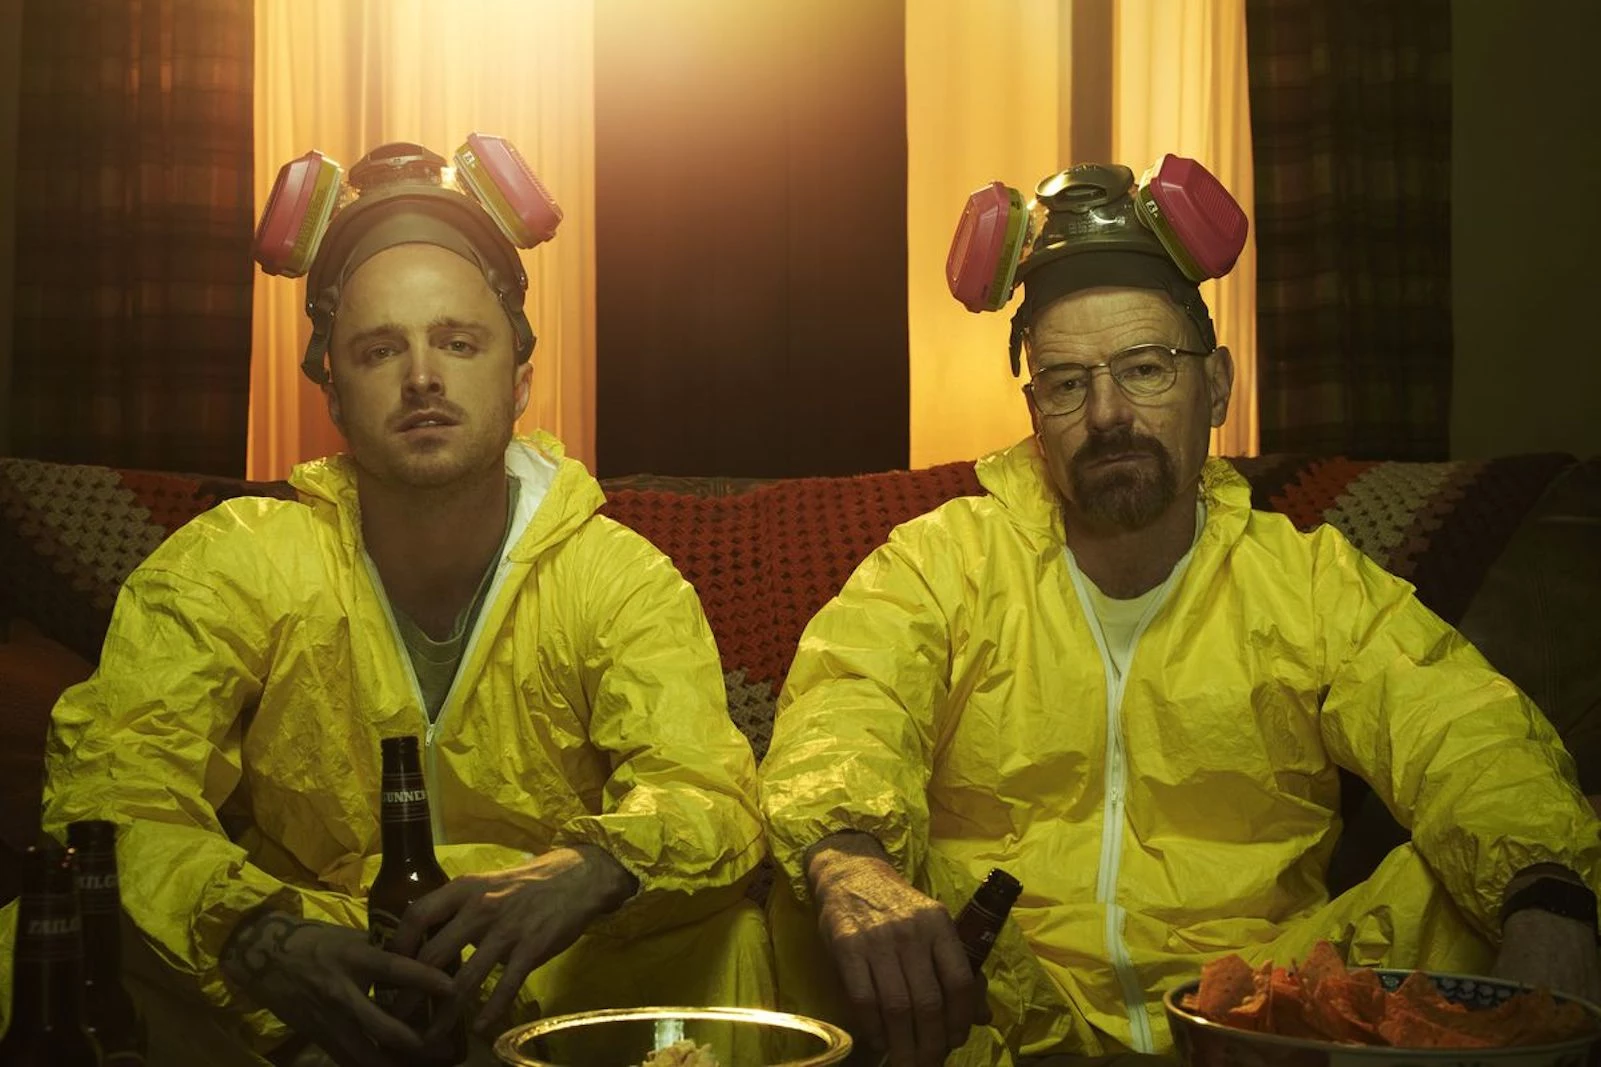 Where Is” Breaking Bad’s” Jesse Pinkman Now?